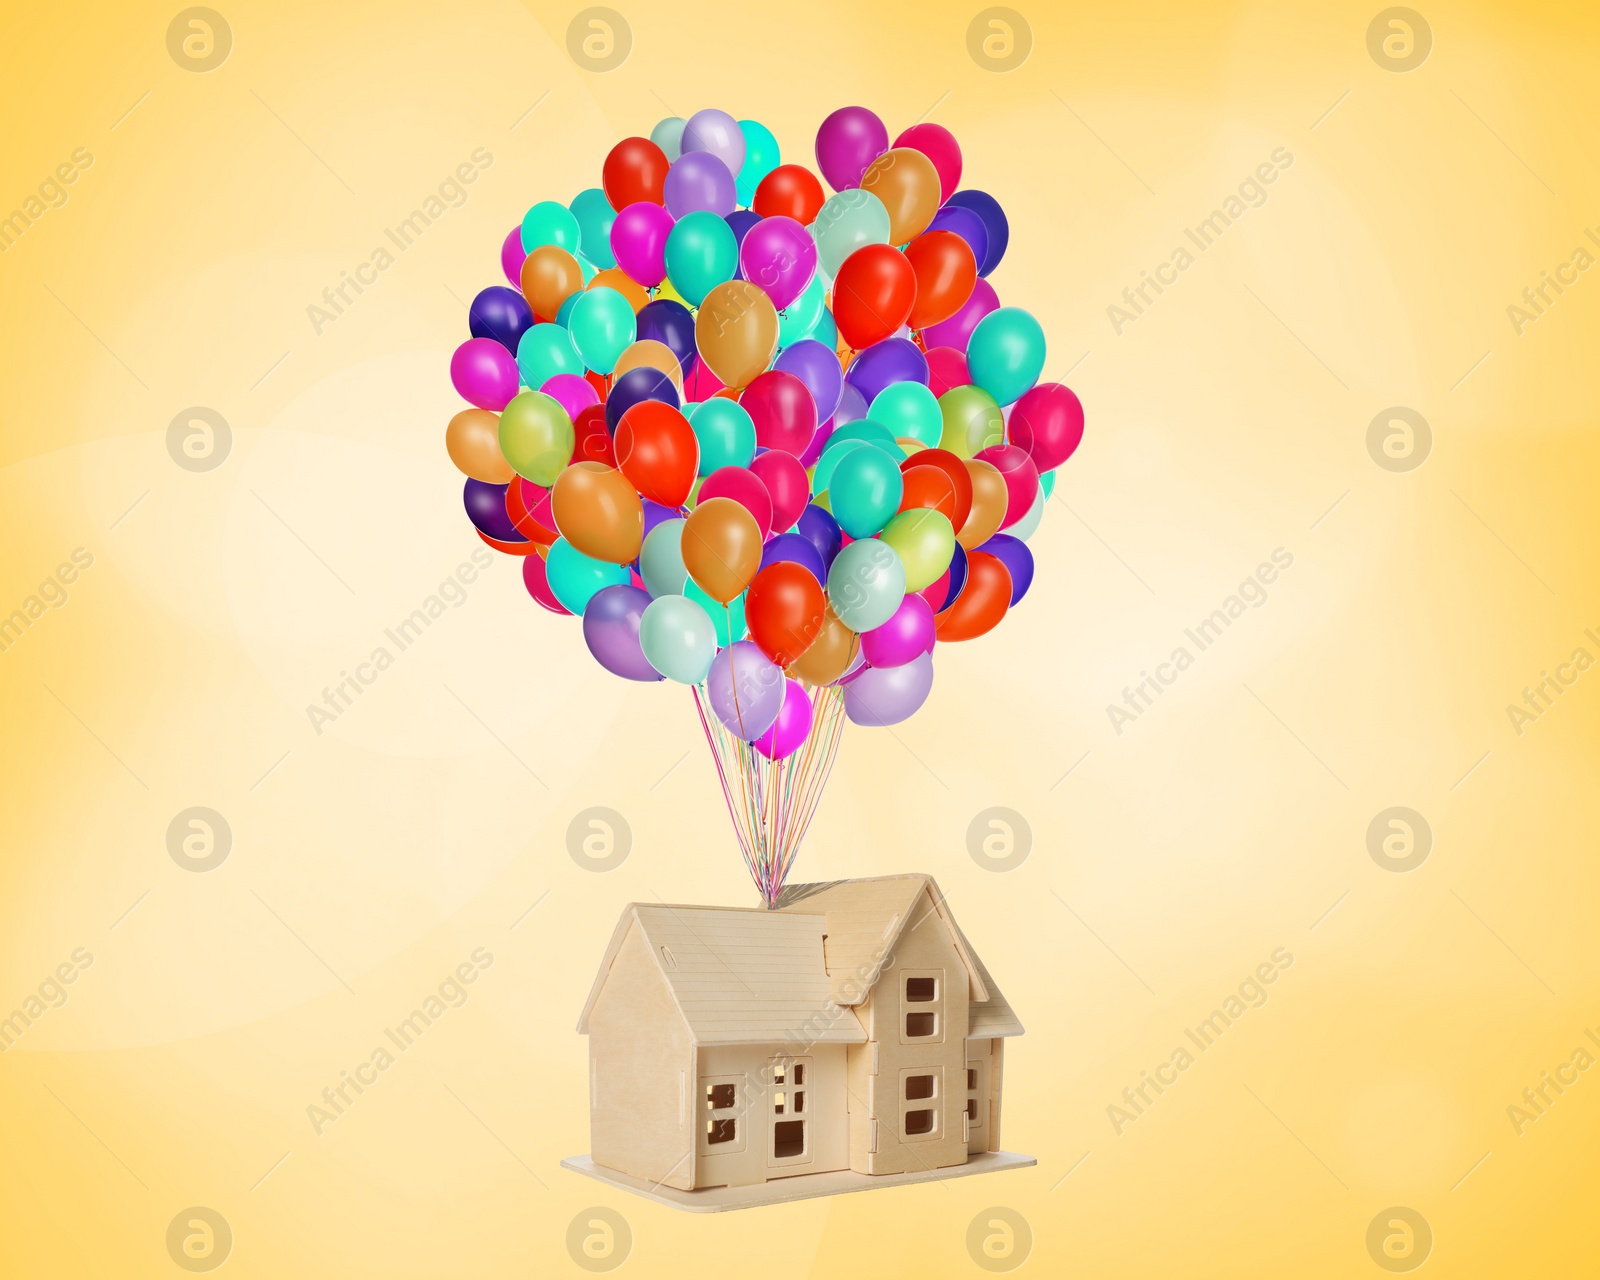 Image of Many balloons tied to model of house flying on golden background